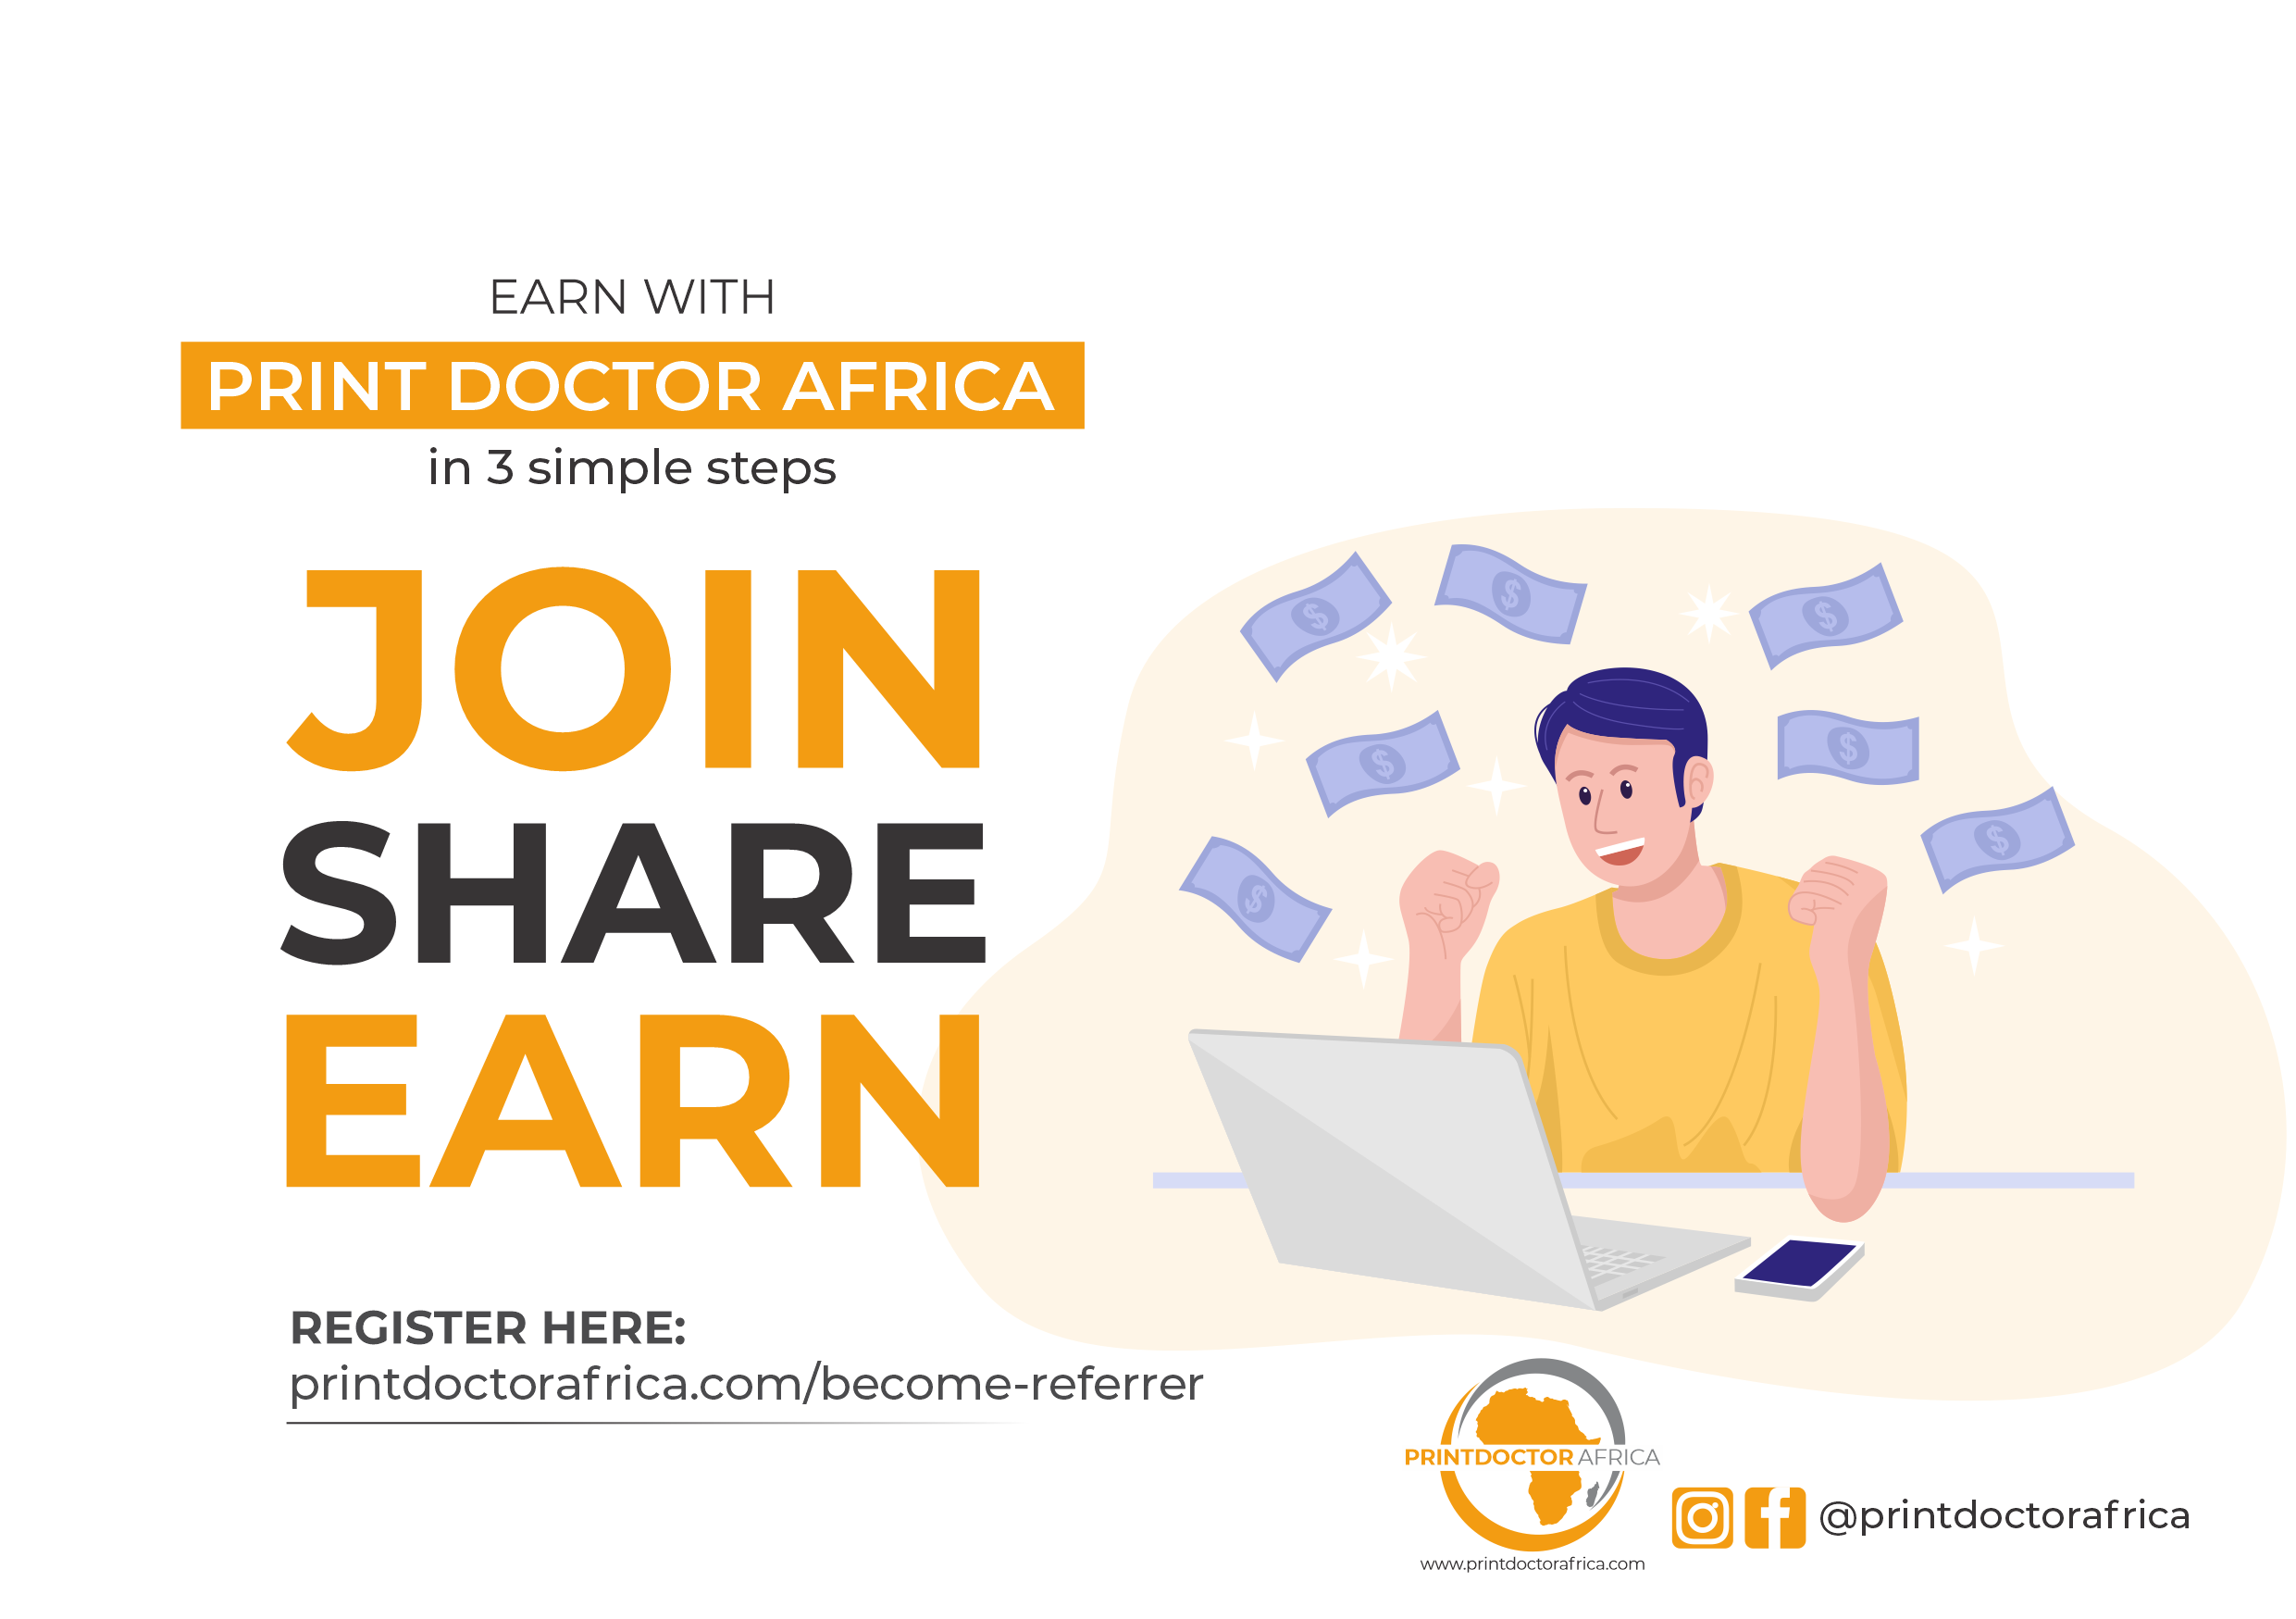 How to Use the Print Doctor Africa Referral System